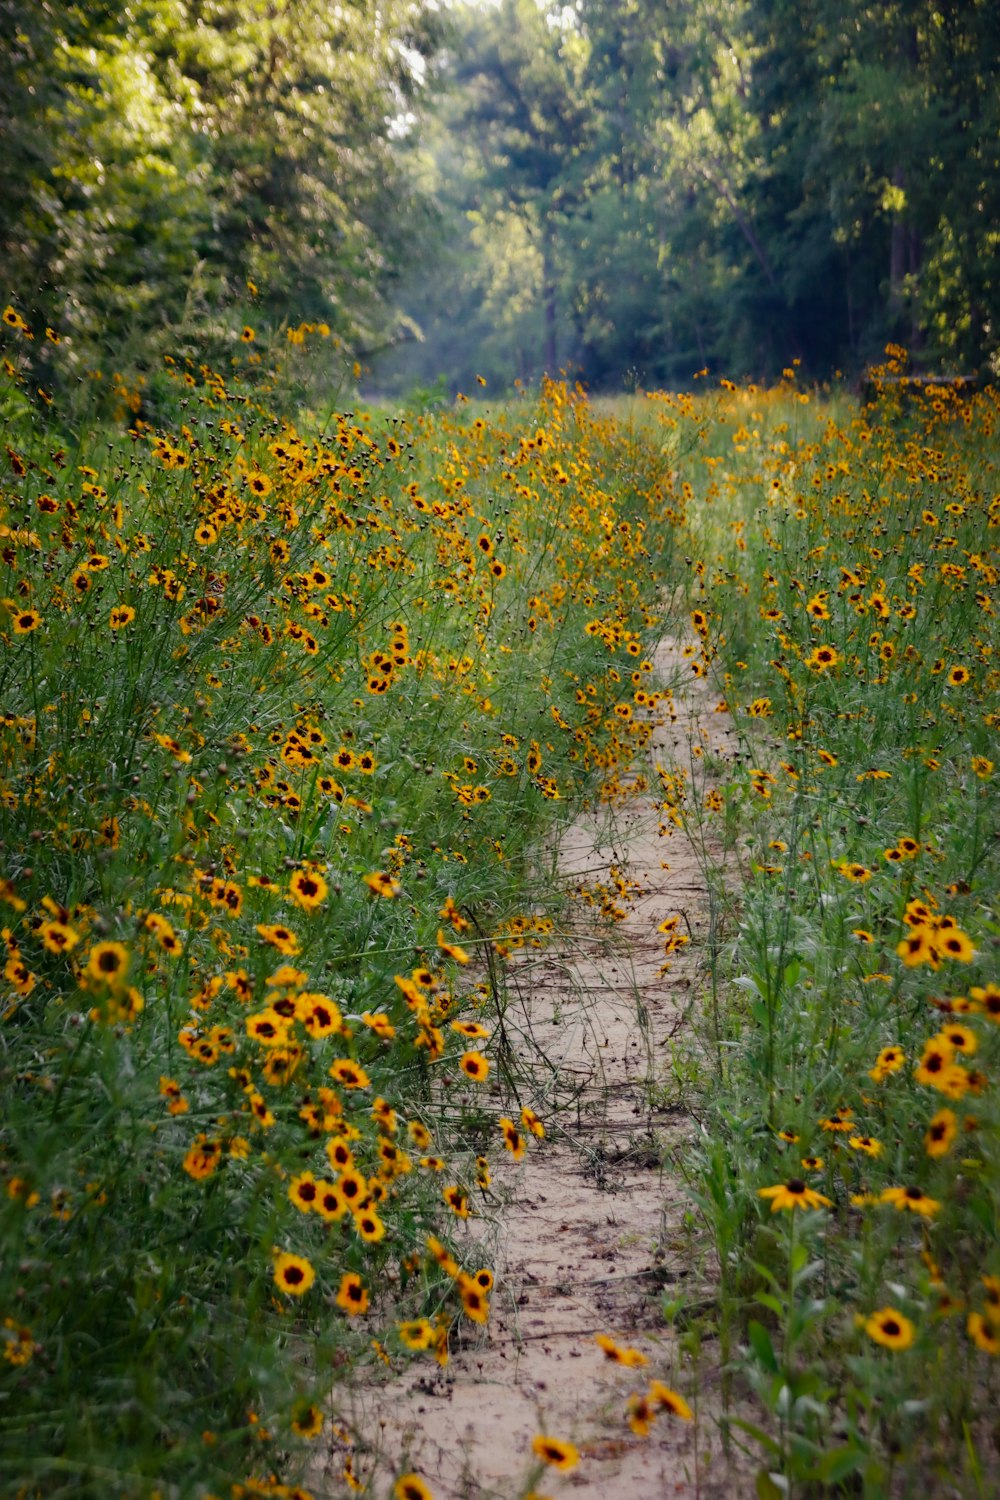 a dirt road surrounded by tall grass and yellow flowers